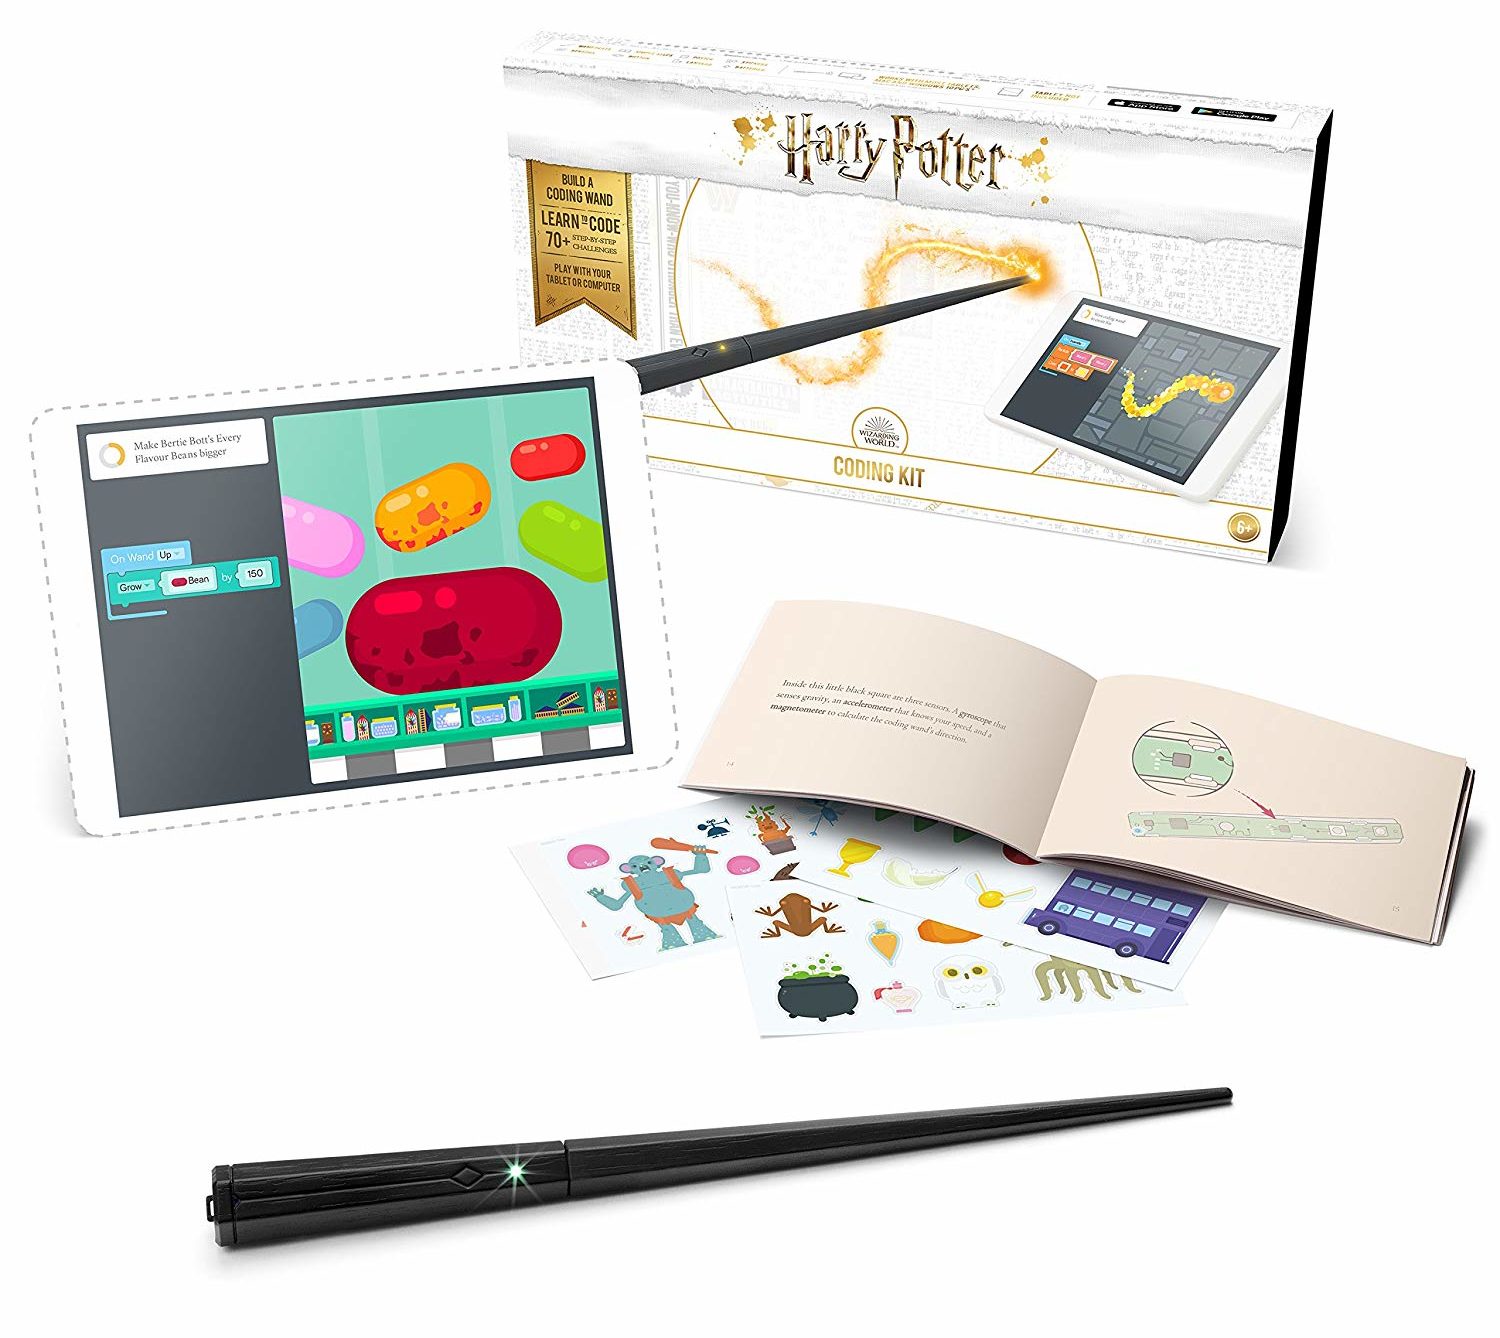 Where to Buy Kano Harry Potter Wand (Coding) in 2018 - Release Date, Price & Pre Order